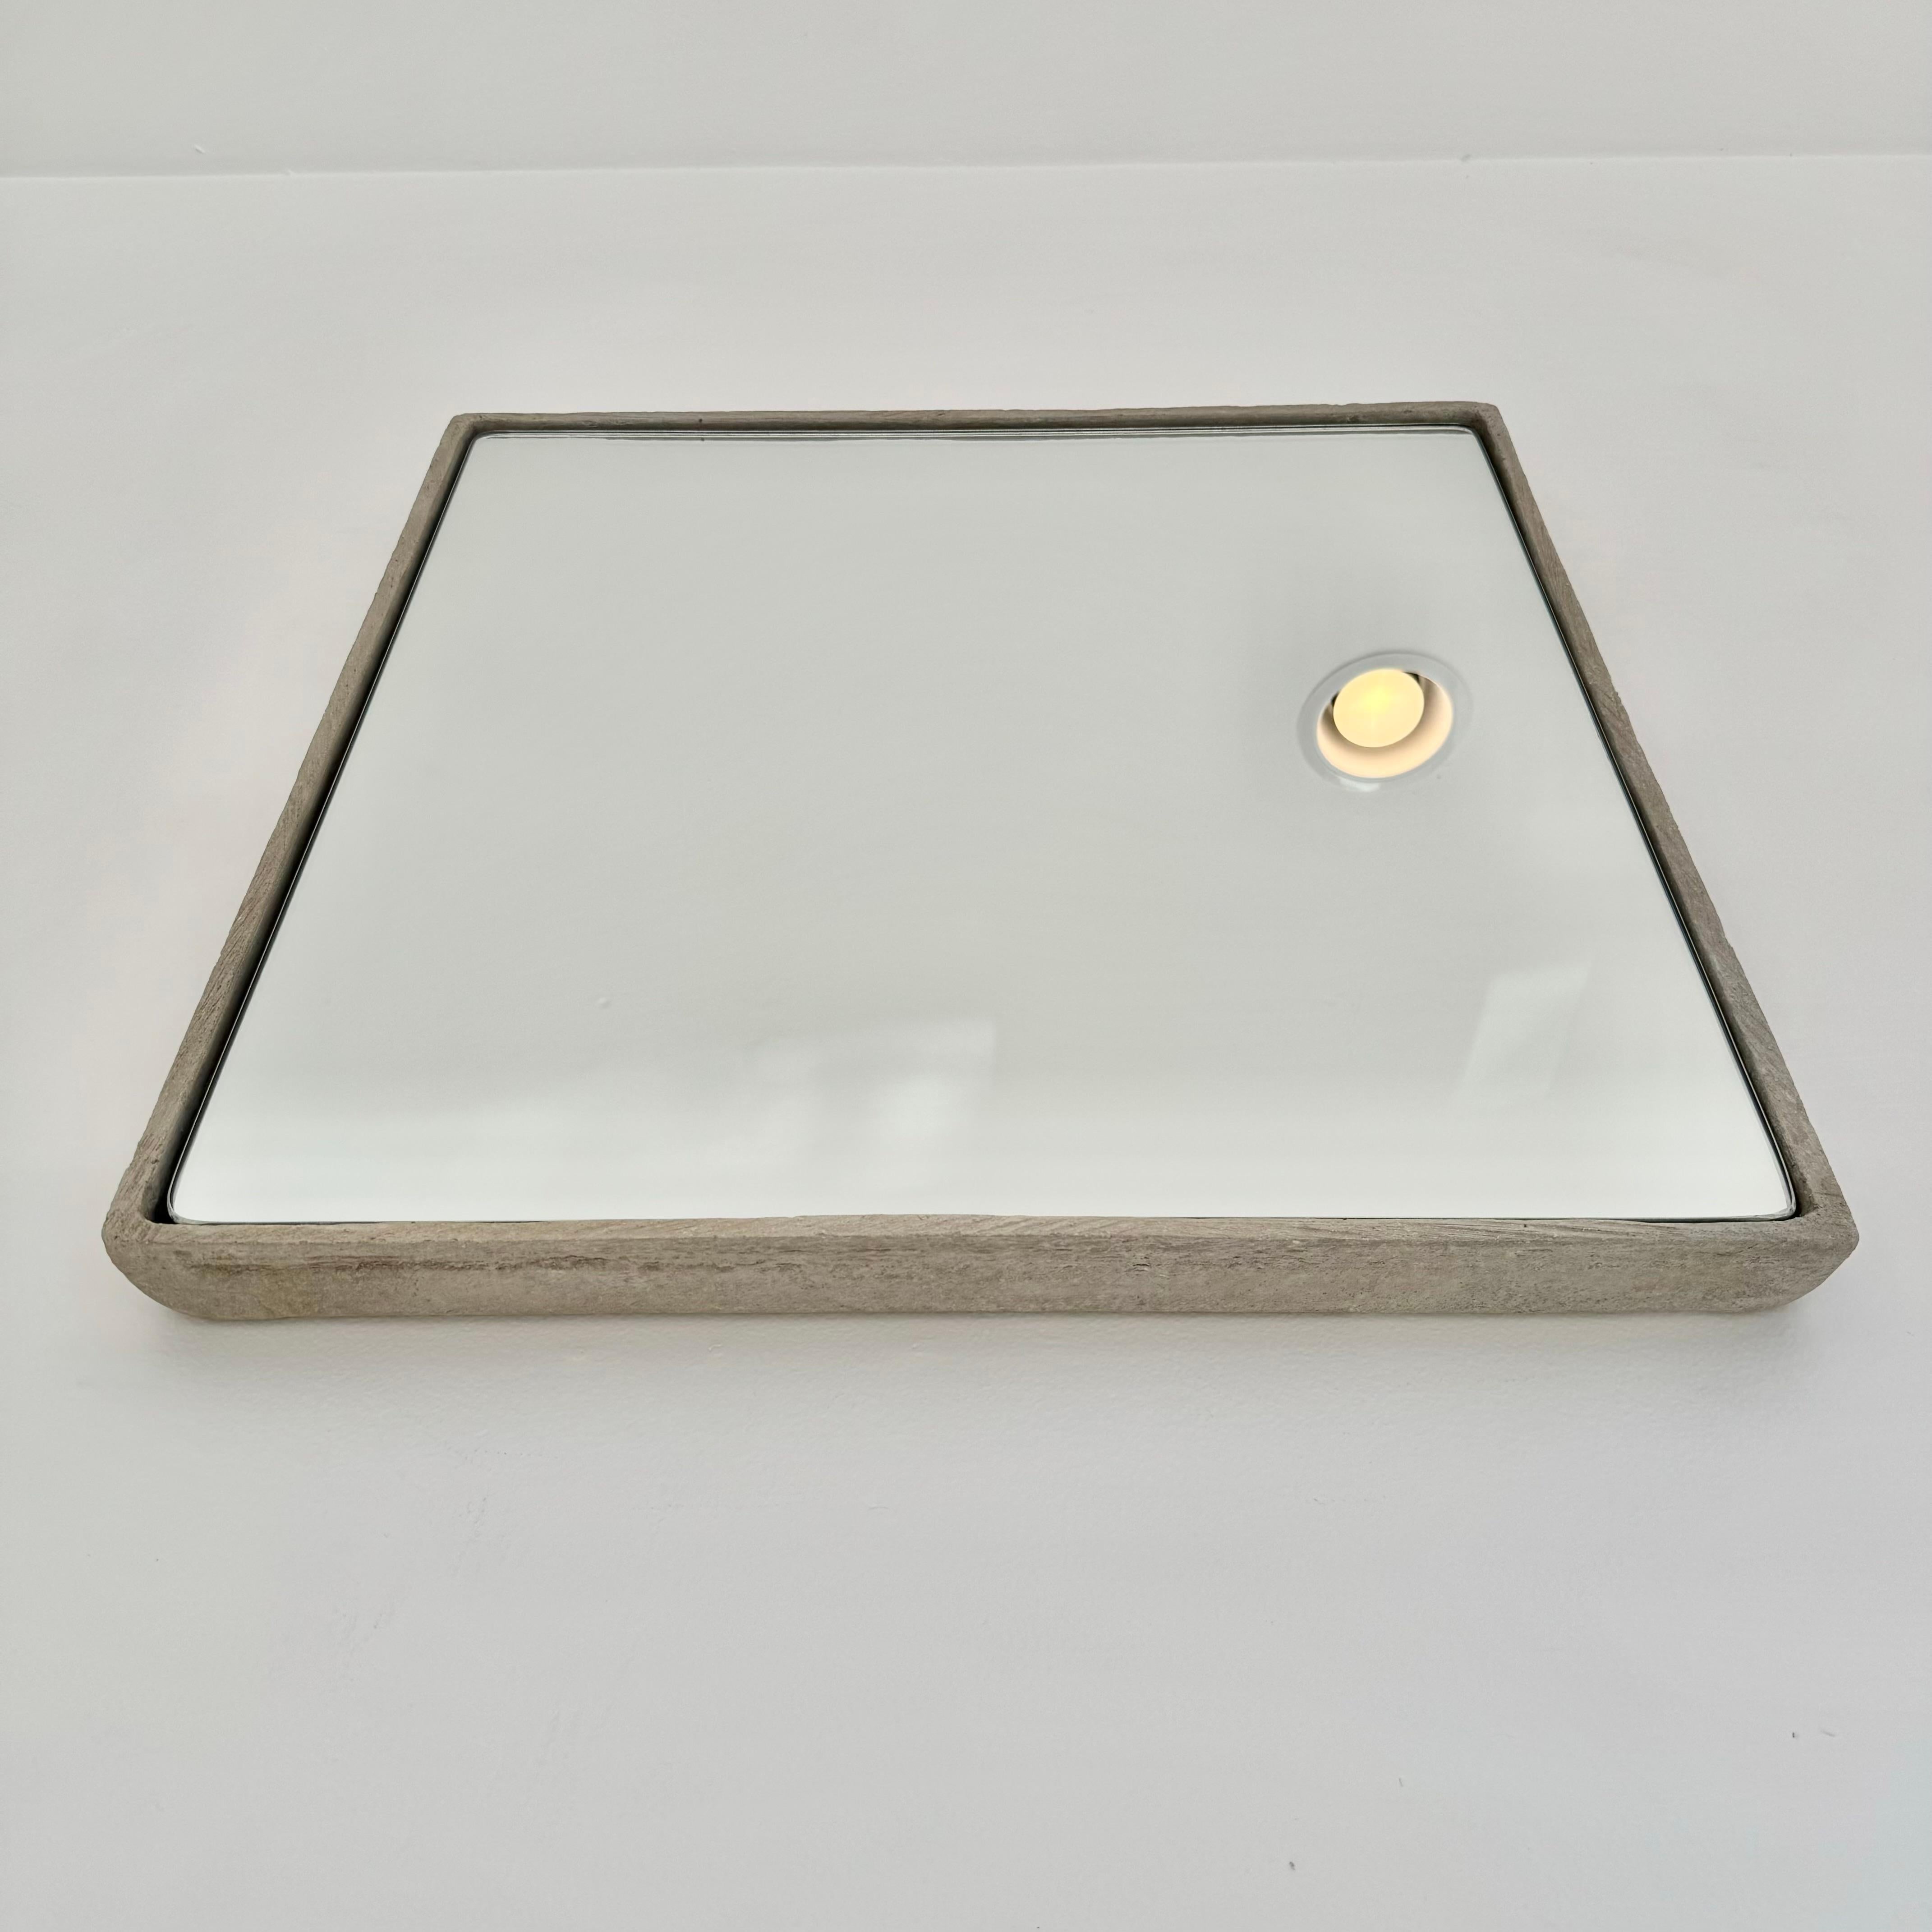 Large Square Willy Guhl Concrete Mirror, 1960s Switzerland For Sale 3